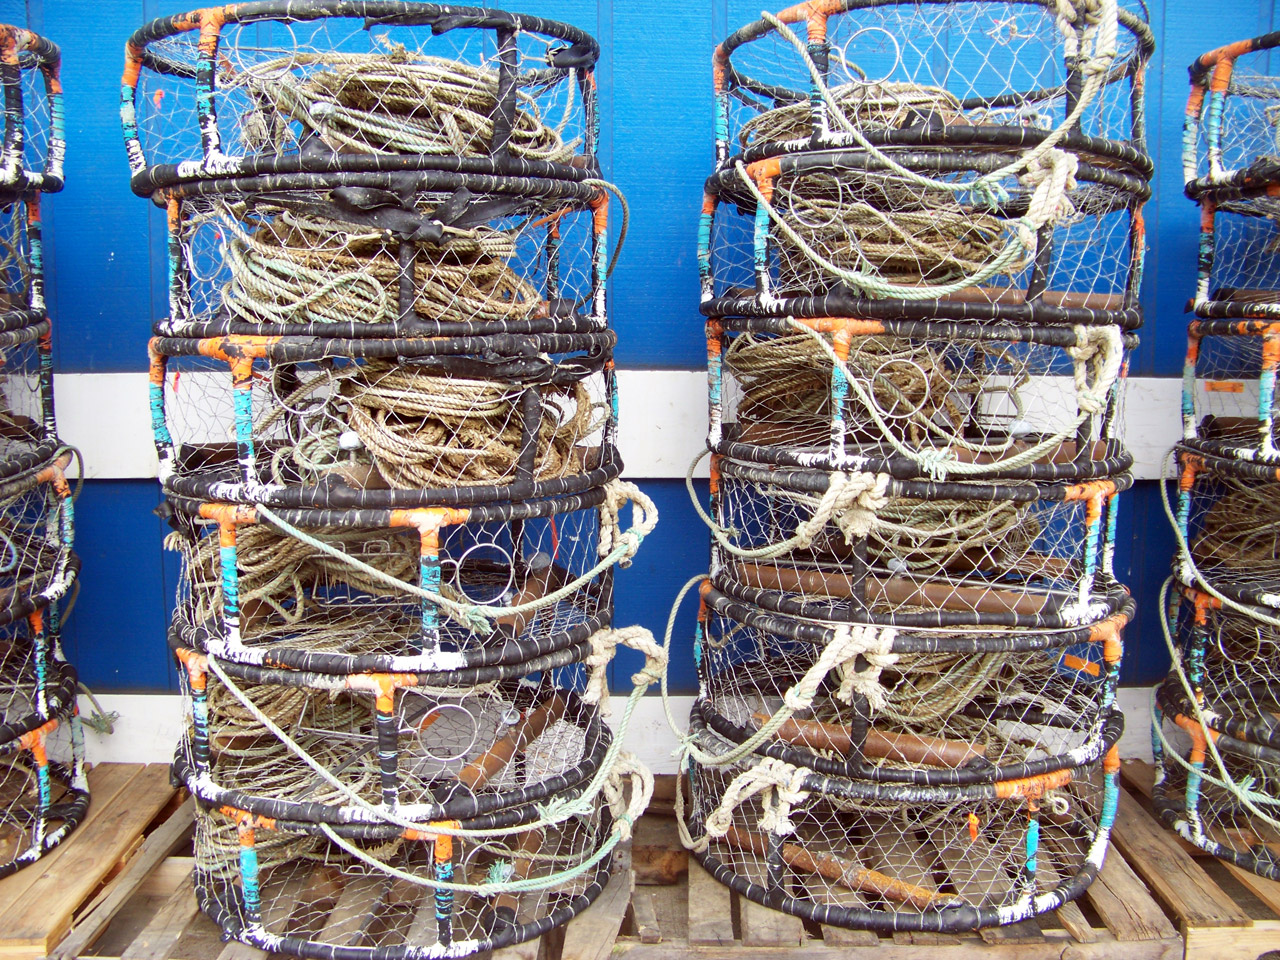 Crab pots in a row after the day's haul